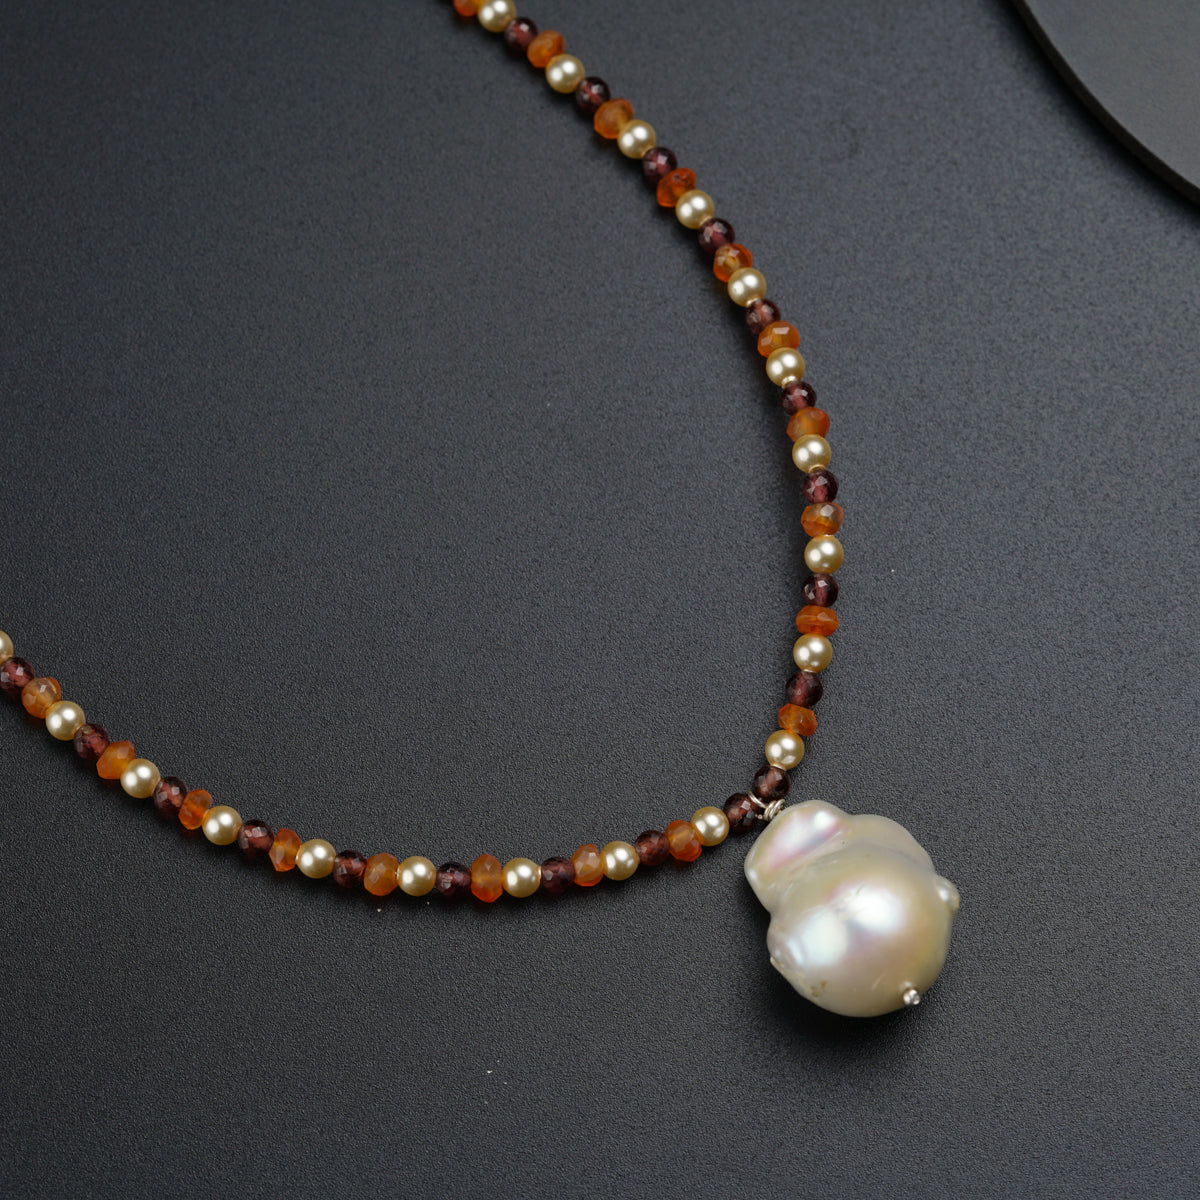 Handmade Silver Set with Pearls, Carnelians and Garnets